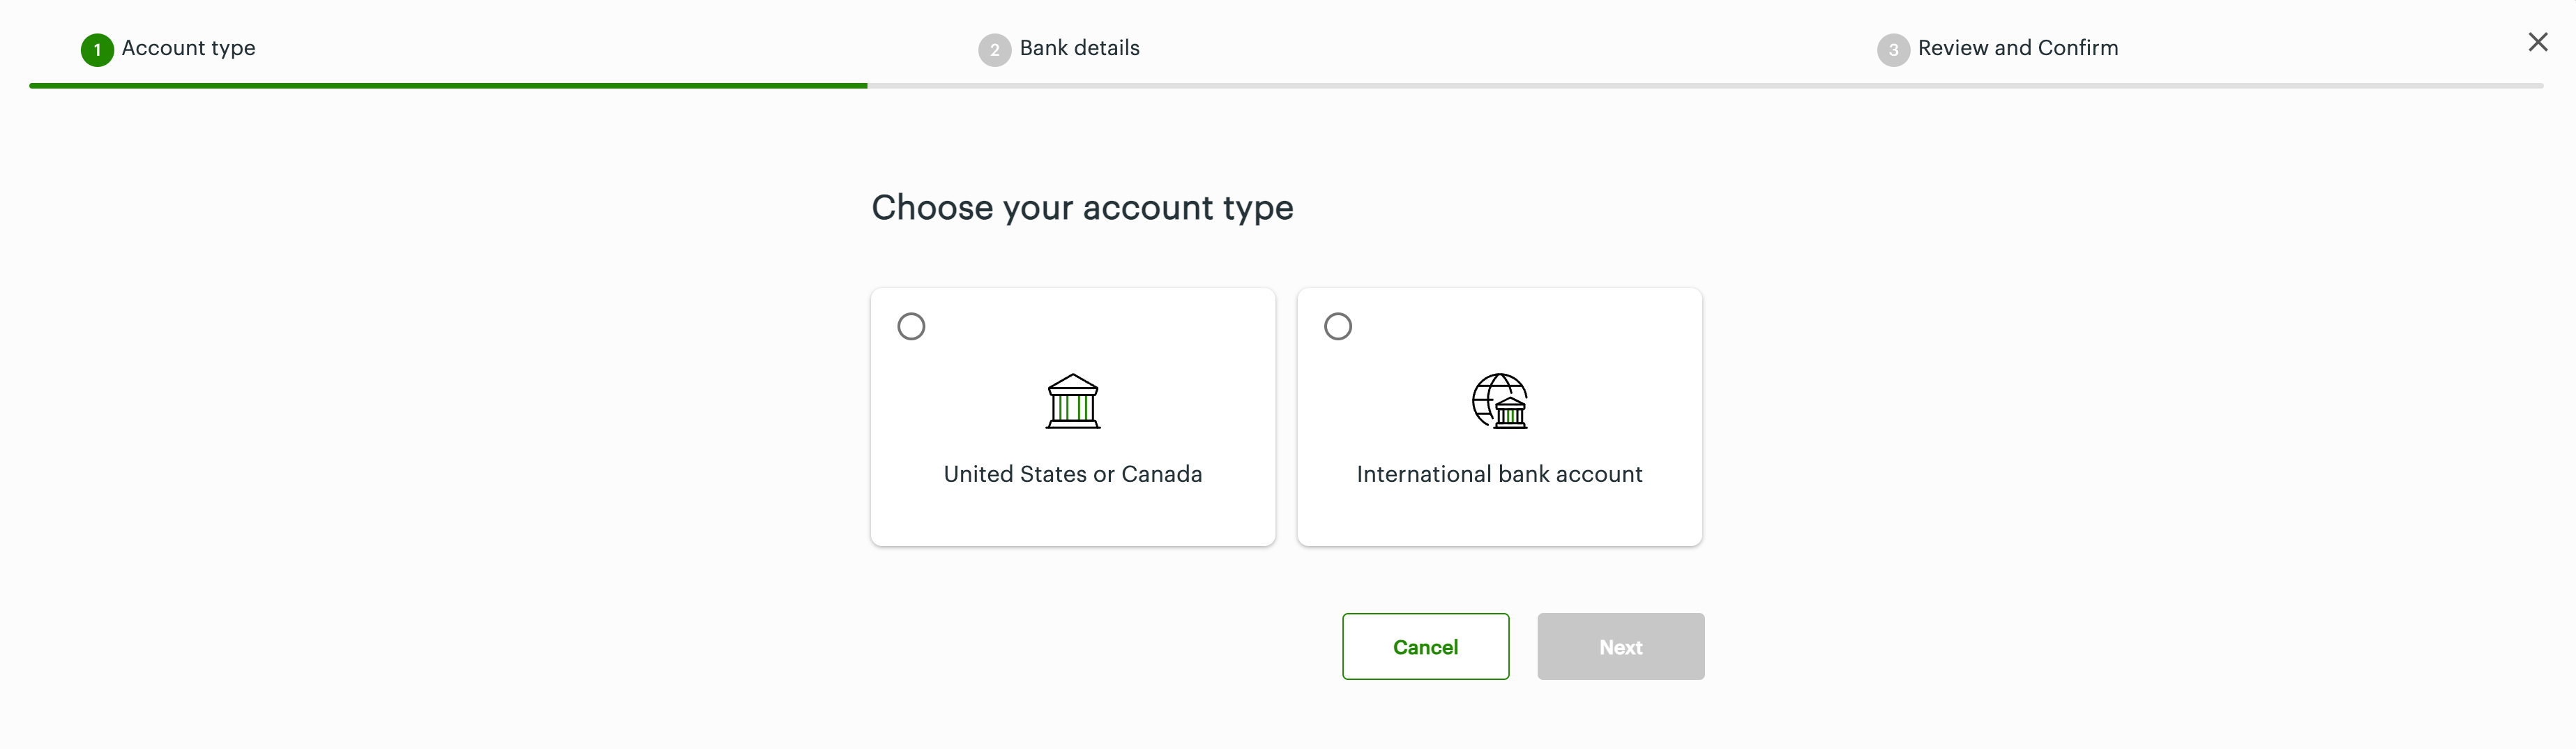 Choose your account type page